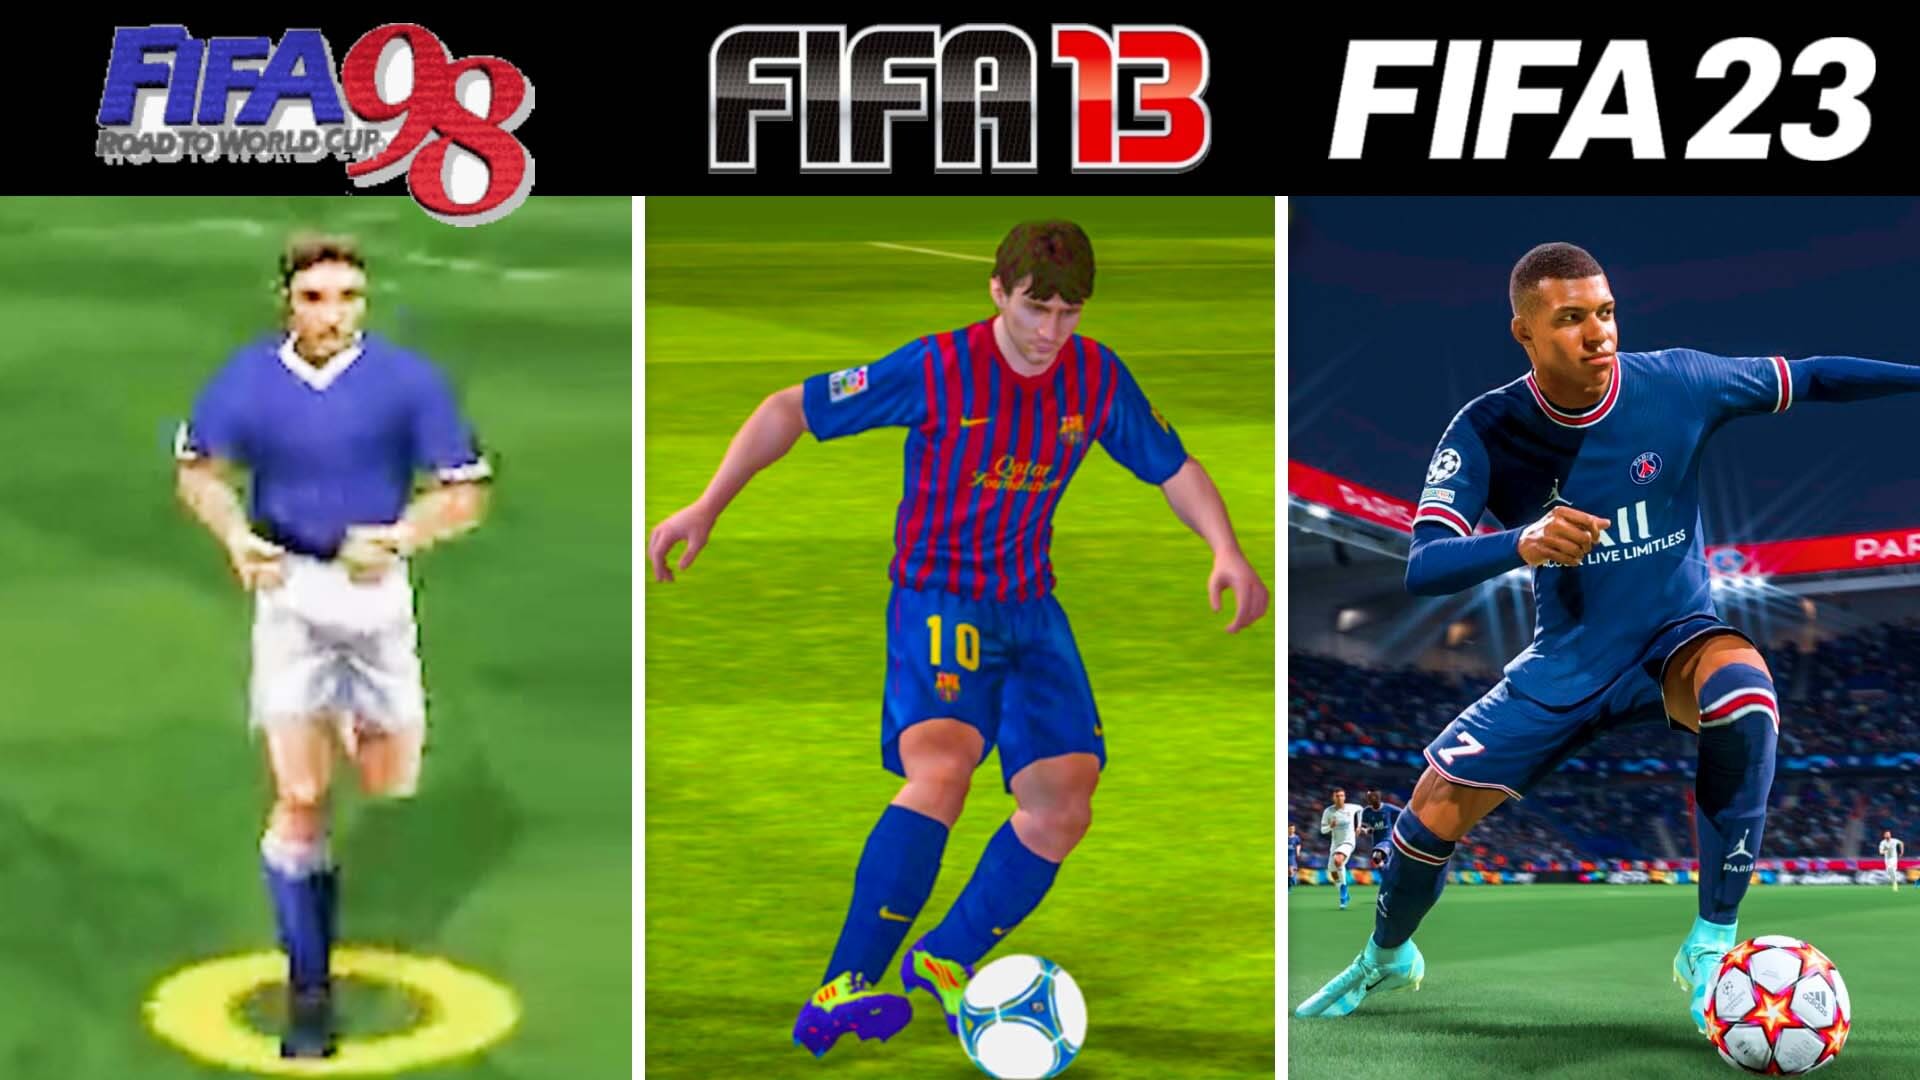 TIL games are still being released for the PS2, with FIFA 13